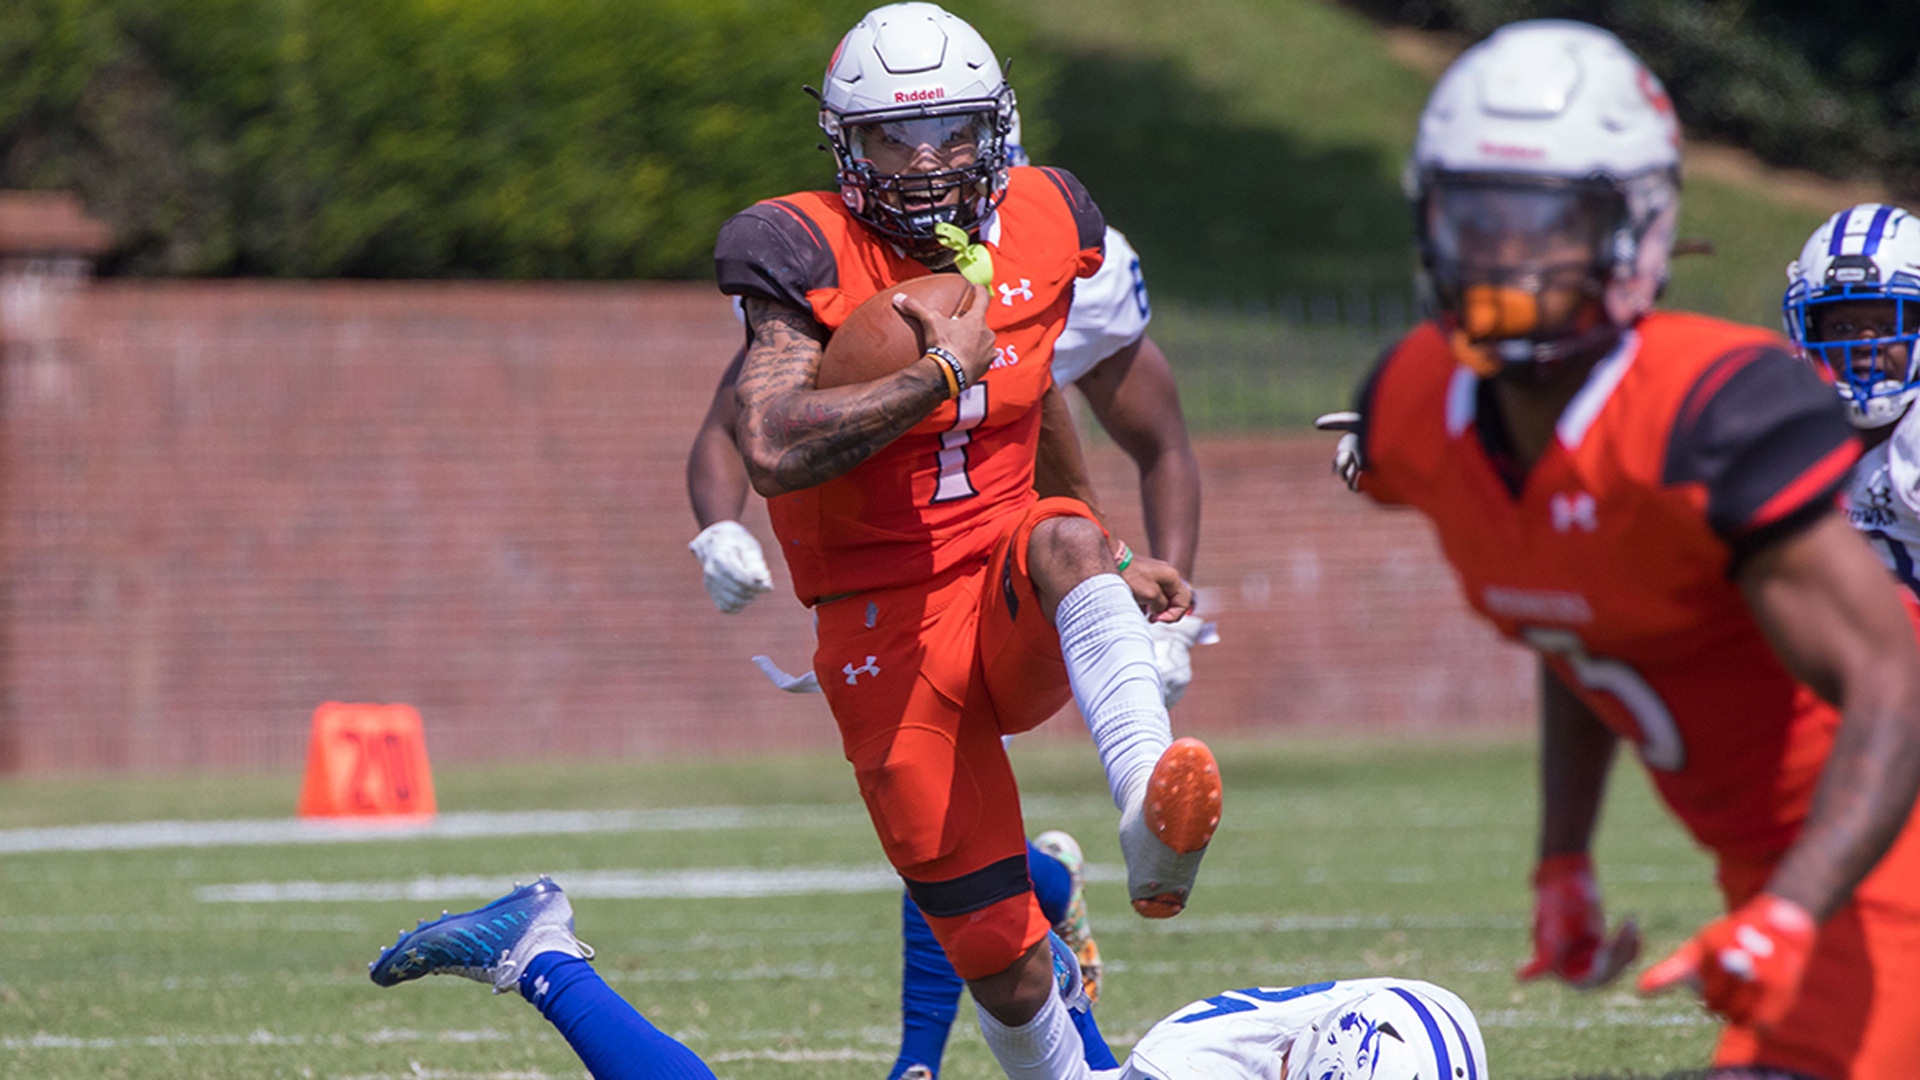 Ivan Corbin accounted for 3 touchdowns in Saturday's season-opener with Chowan (photo by Chuck Williams)